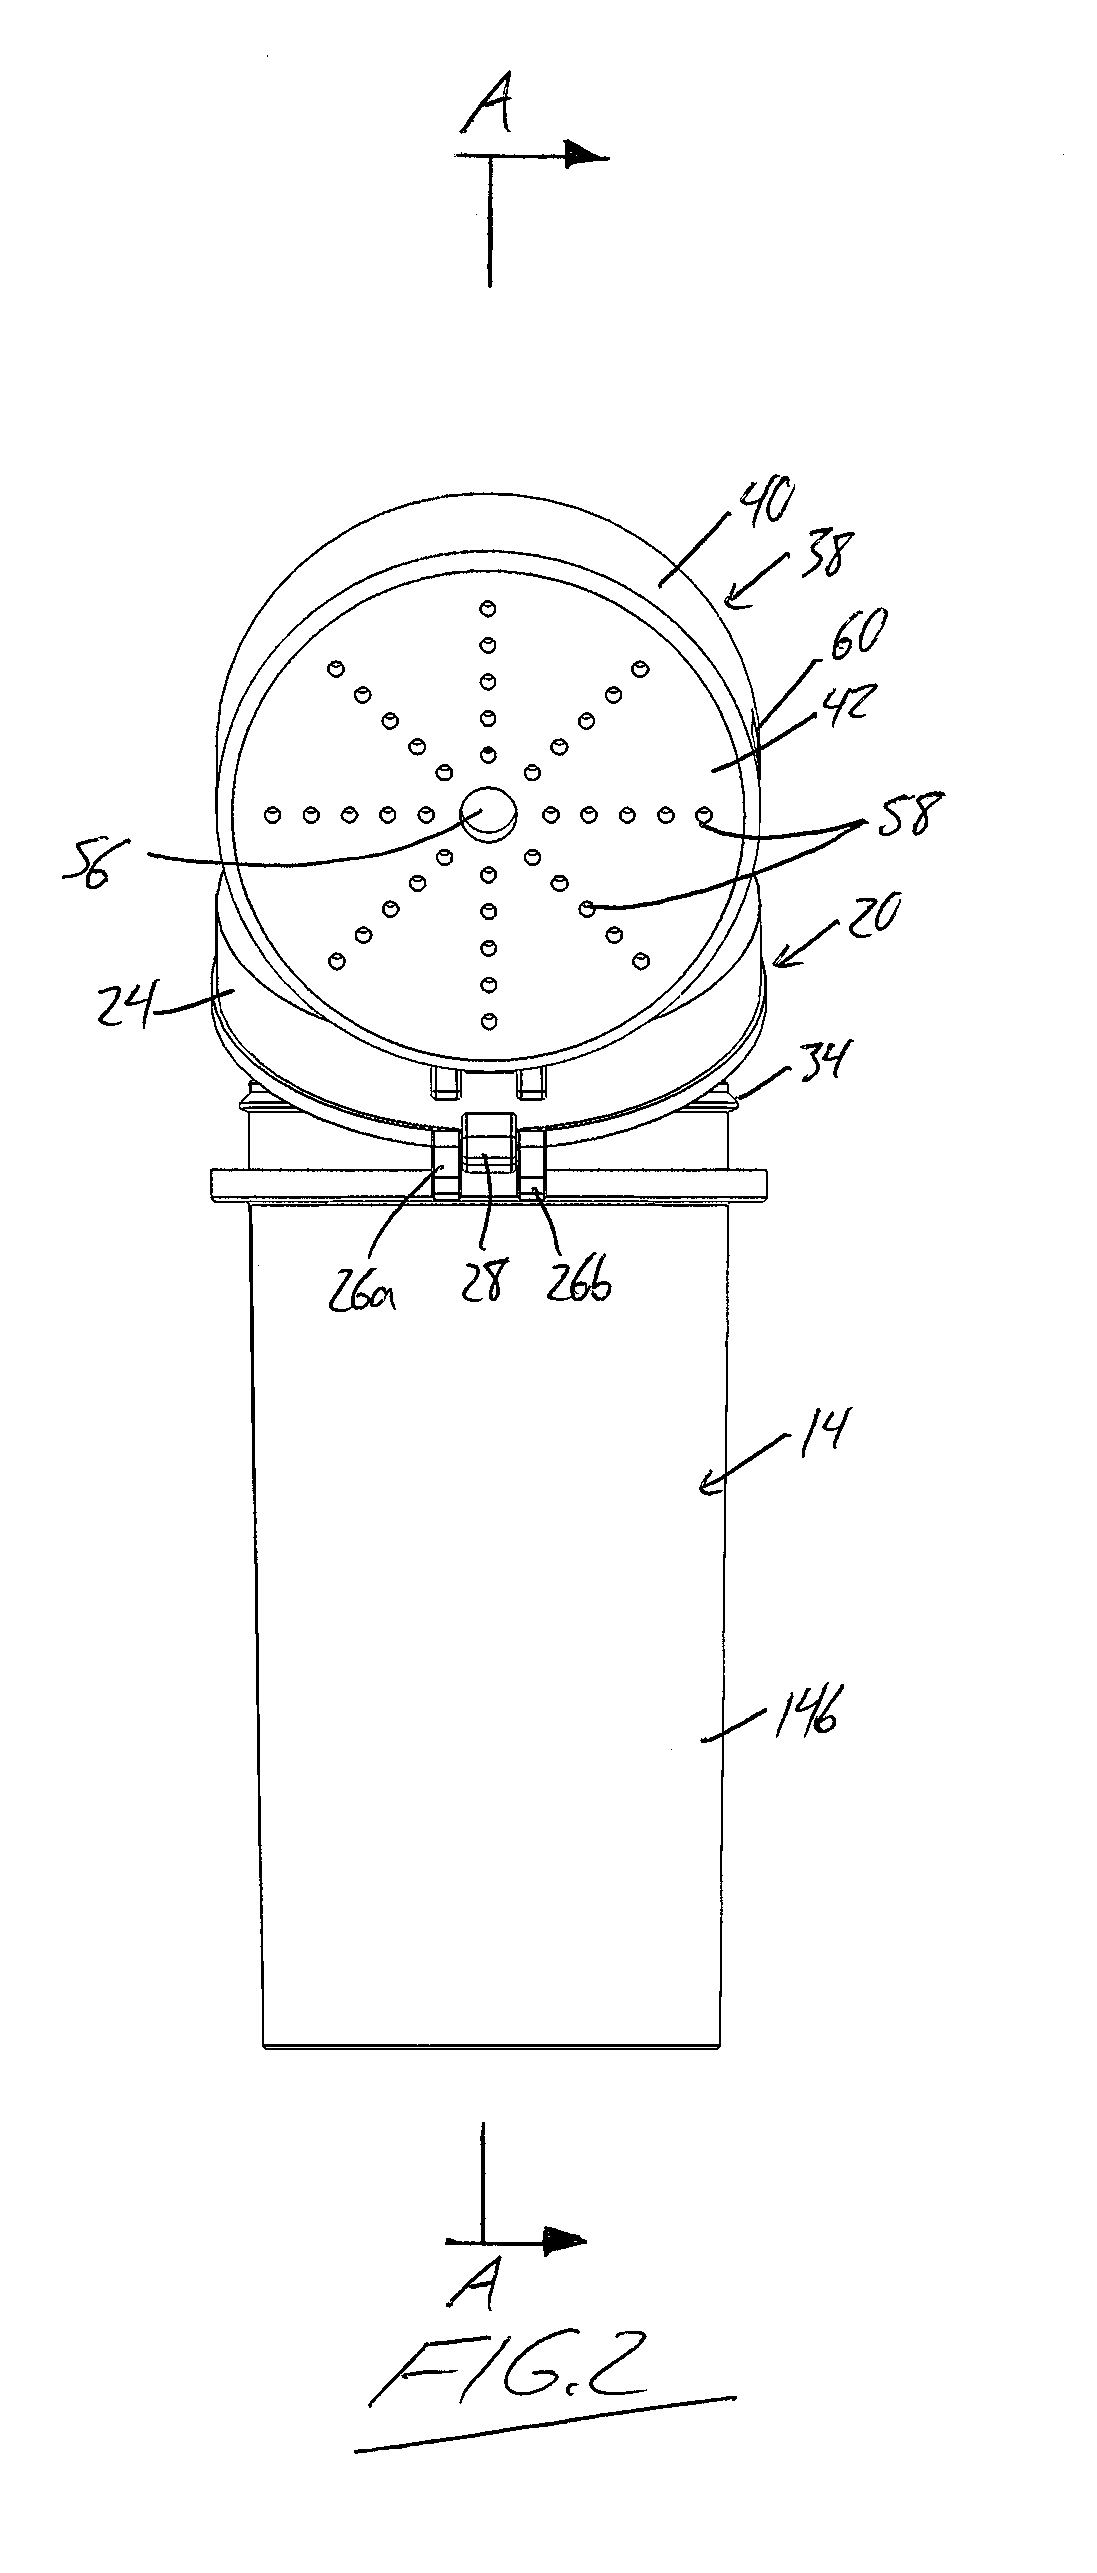 Pill Bottle Lid Incorporating Audible Messaging Device, and Pairing Thereof with External Devices for Dosage Reminder and Conflict Checking Purposes